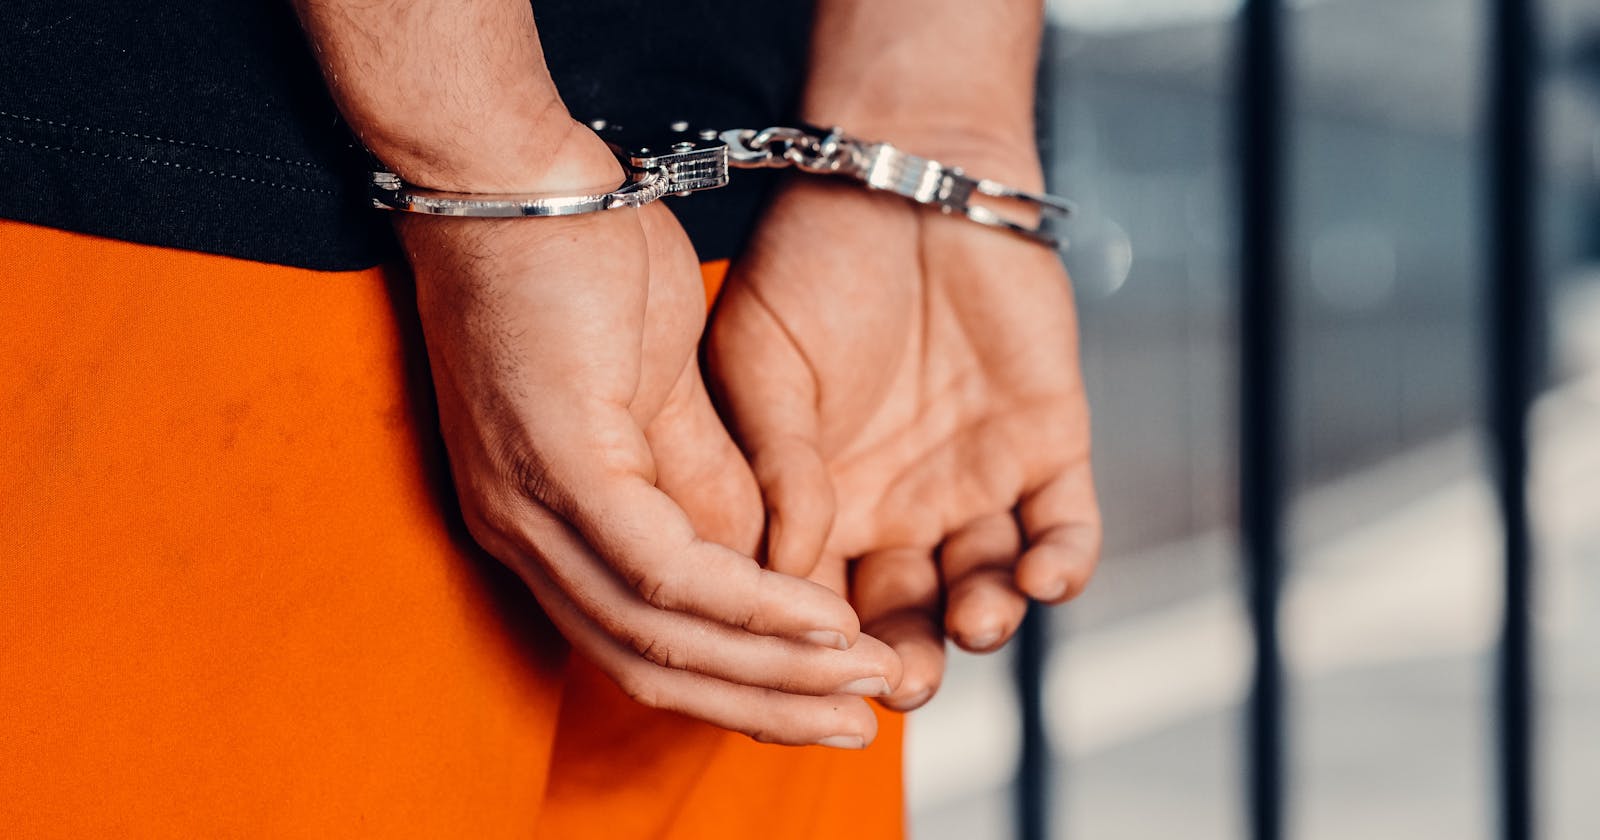 5 Things to Consider Before Bailing Someone Out of Jail